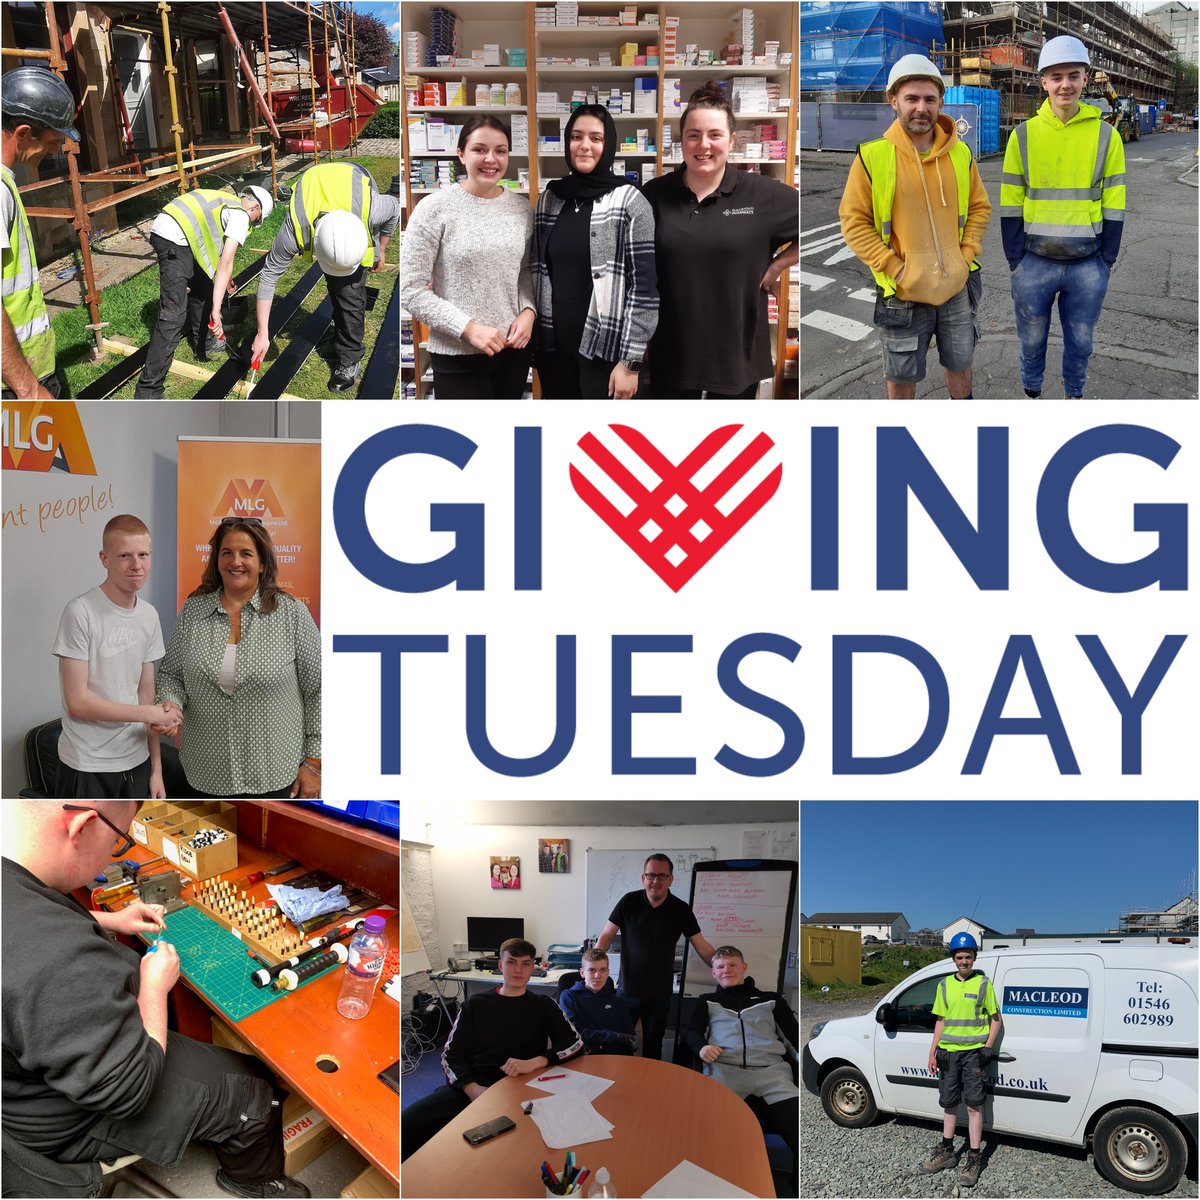 We pride ourselves for giving young people the opportunity to get genuine work experience. On #GivingTuesday we thank the funders & businesses who help and ask you to give your support so more young people get the same chance. donations.workingrite.co.uk